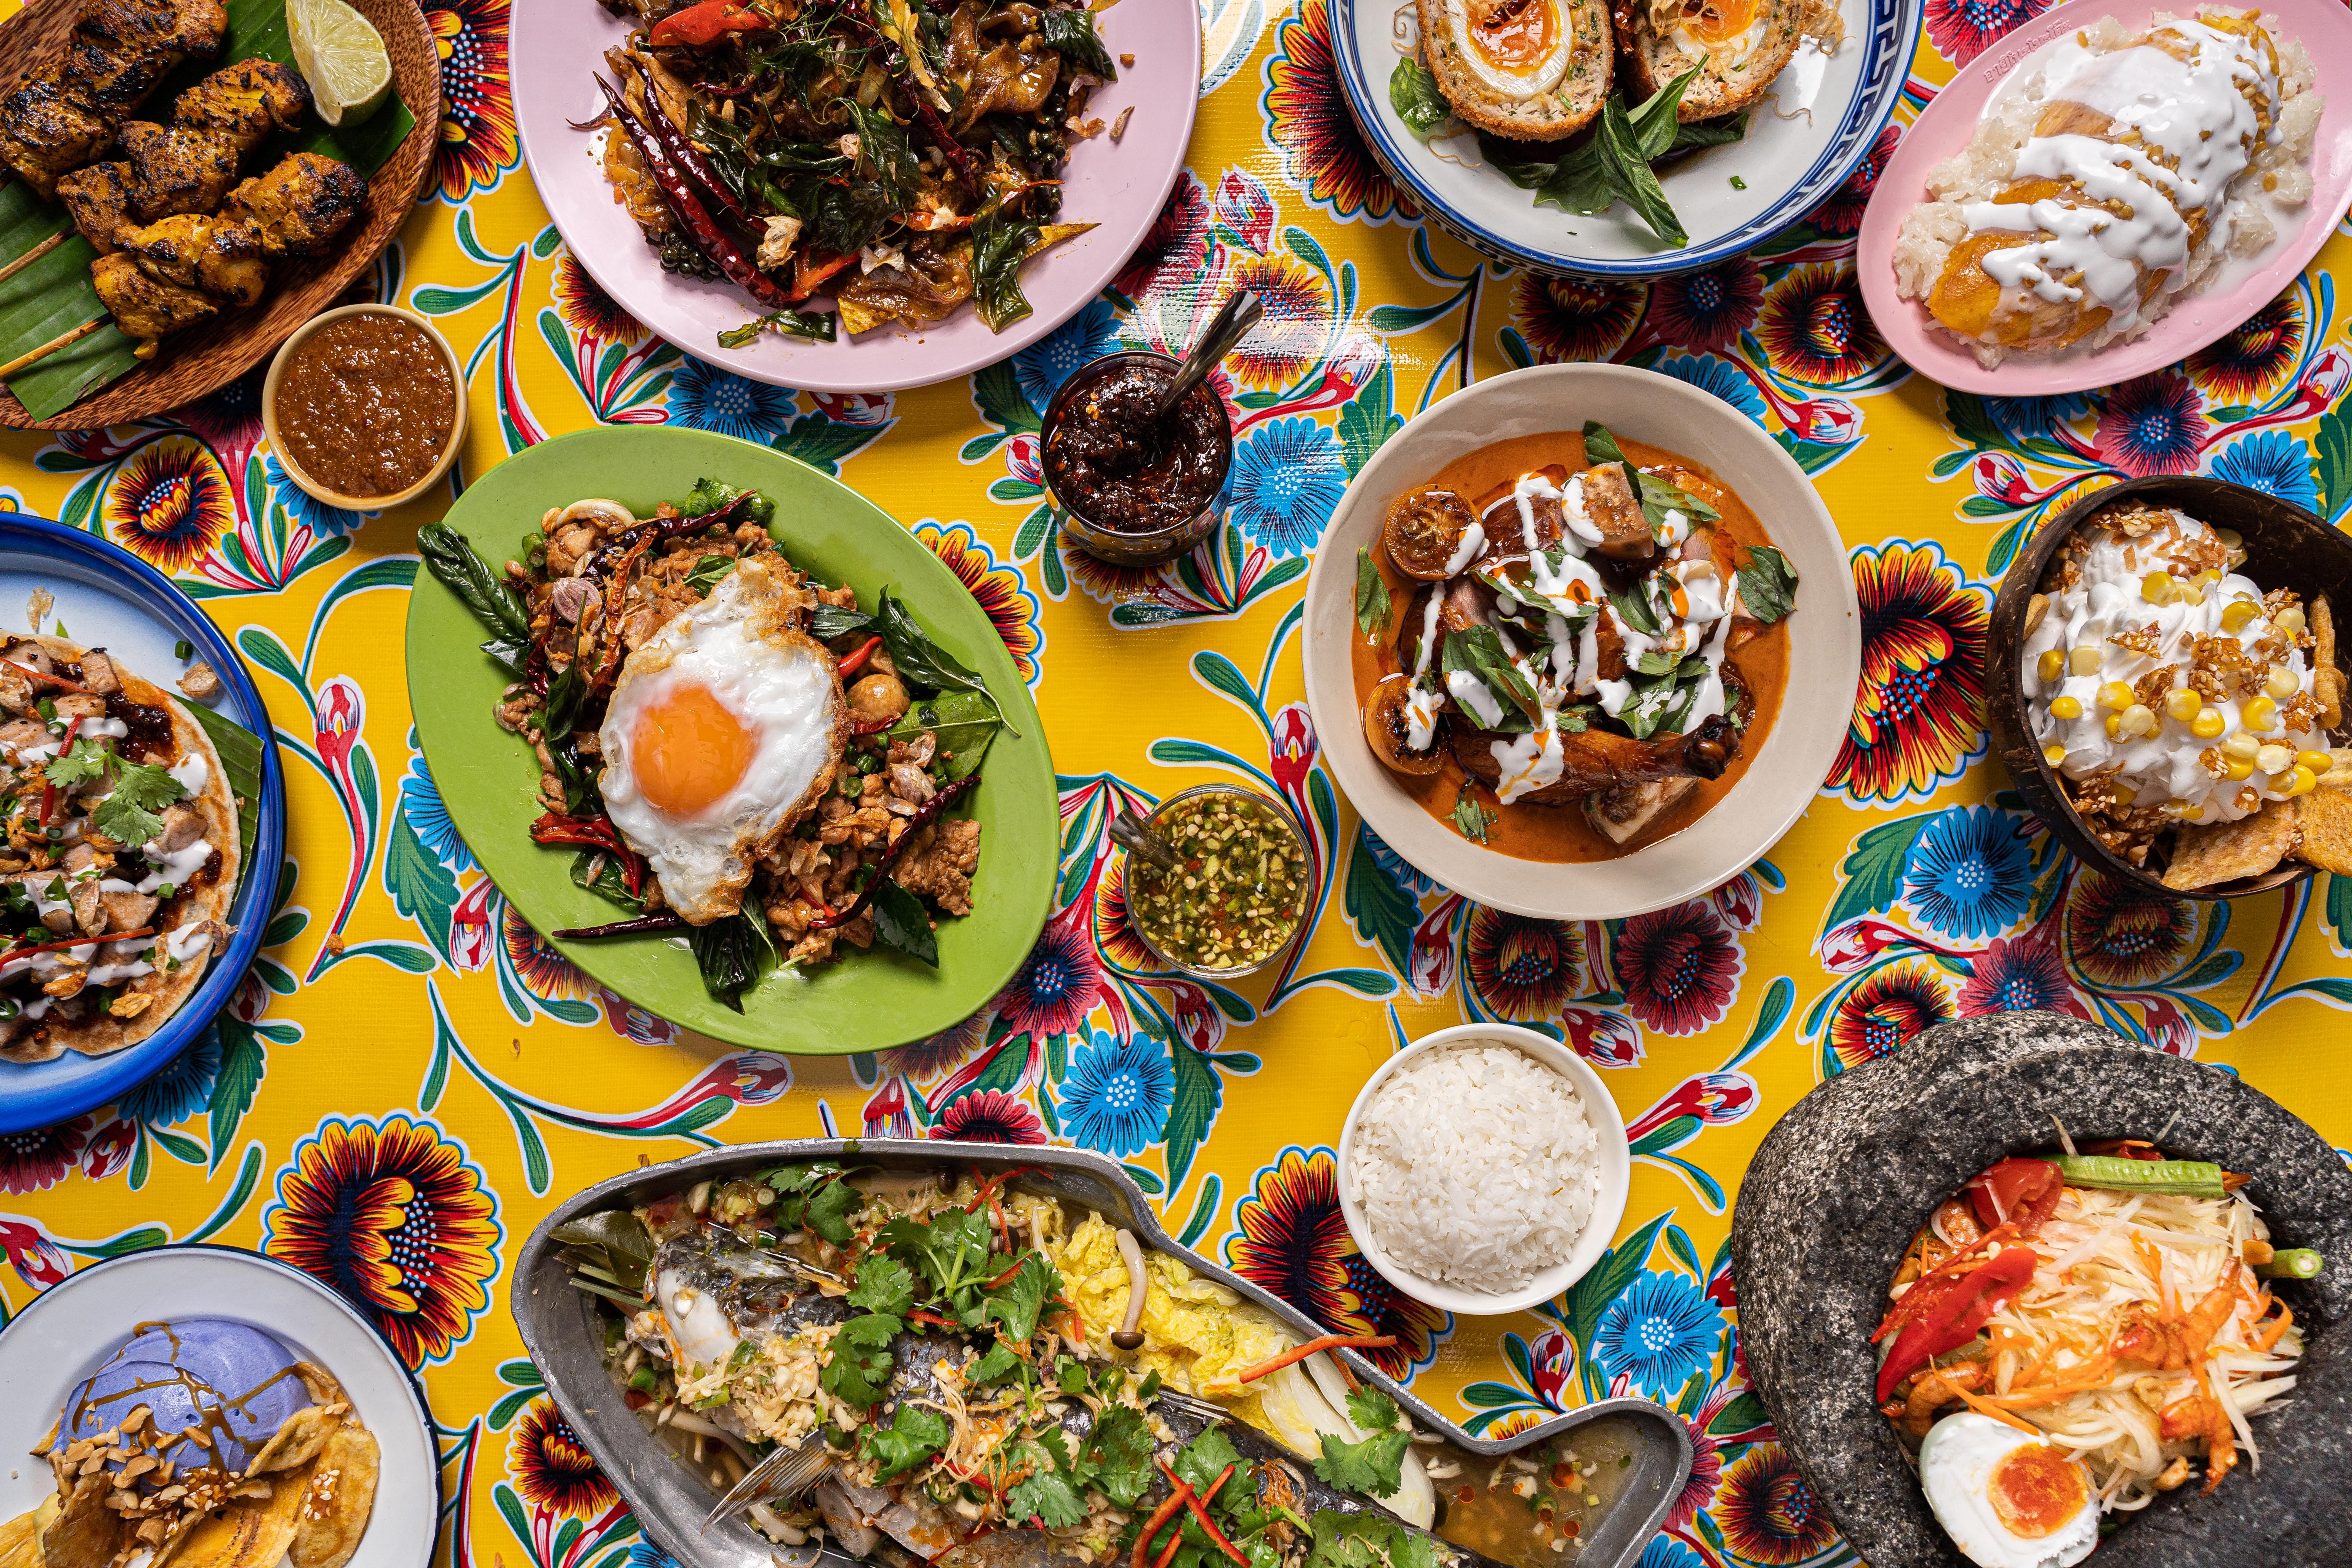 Sip Song, the Thai restaurant and bar inspired by beach culture in southern Thailand and Bangkok’s night market fare, will open in Repulse Bay this month.